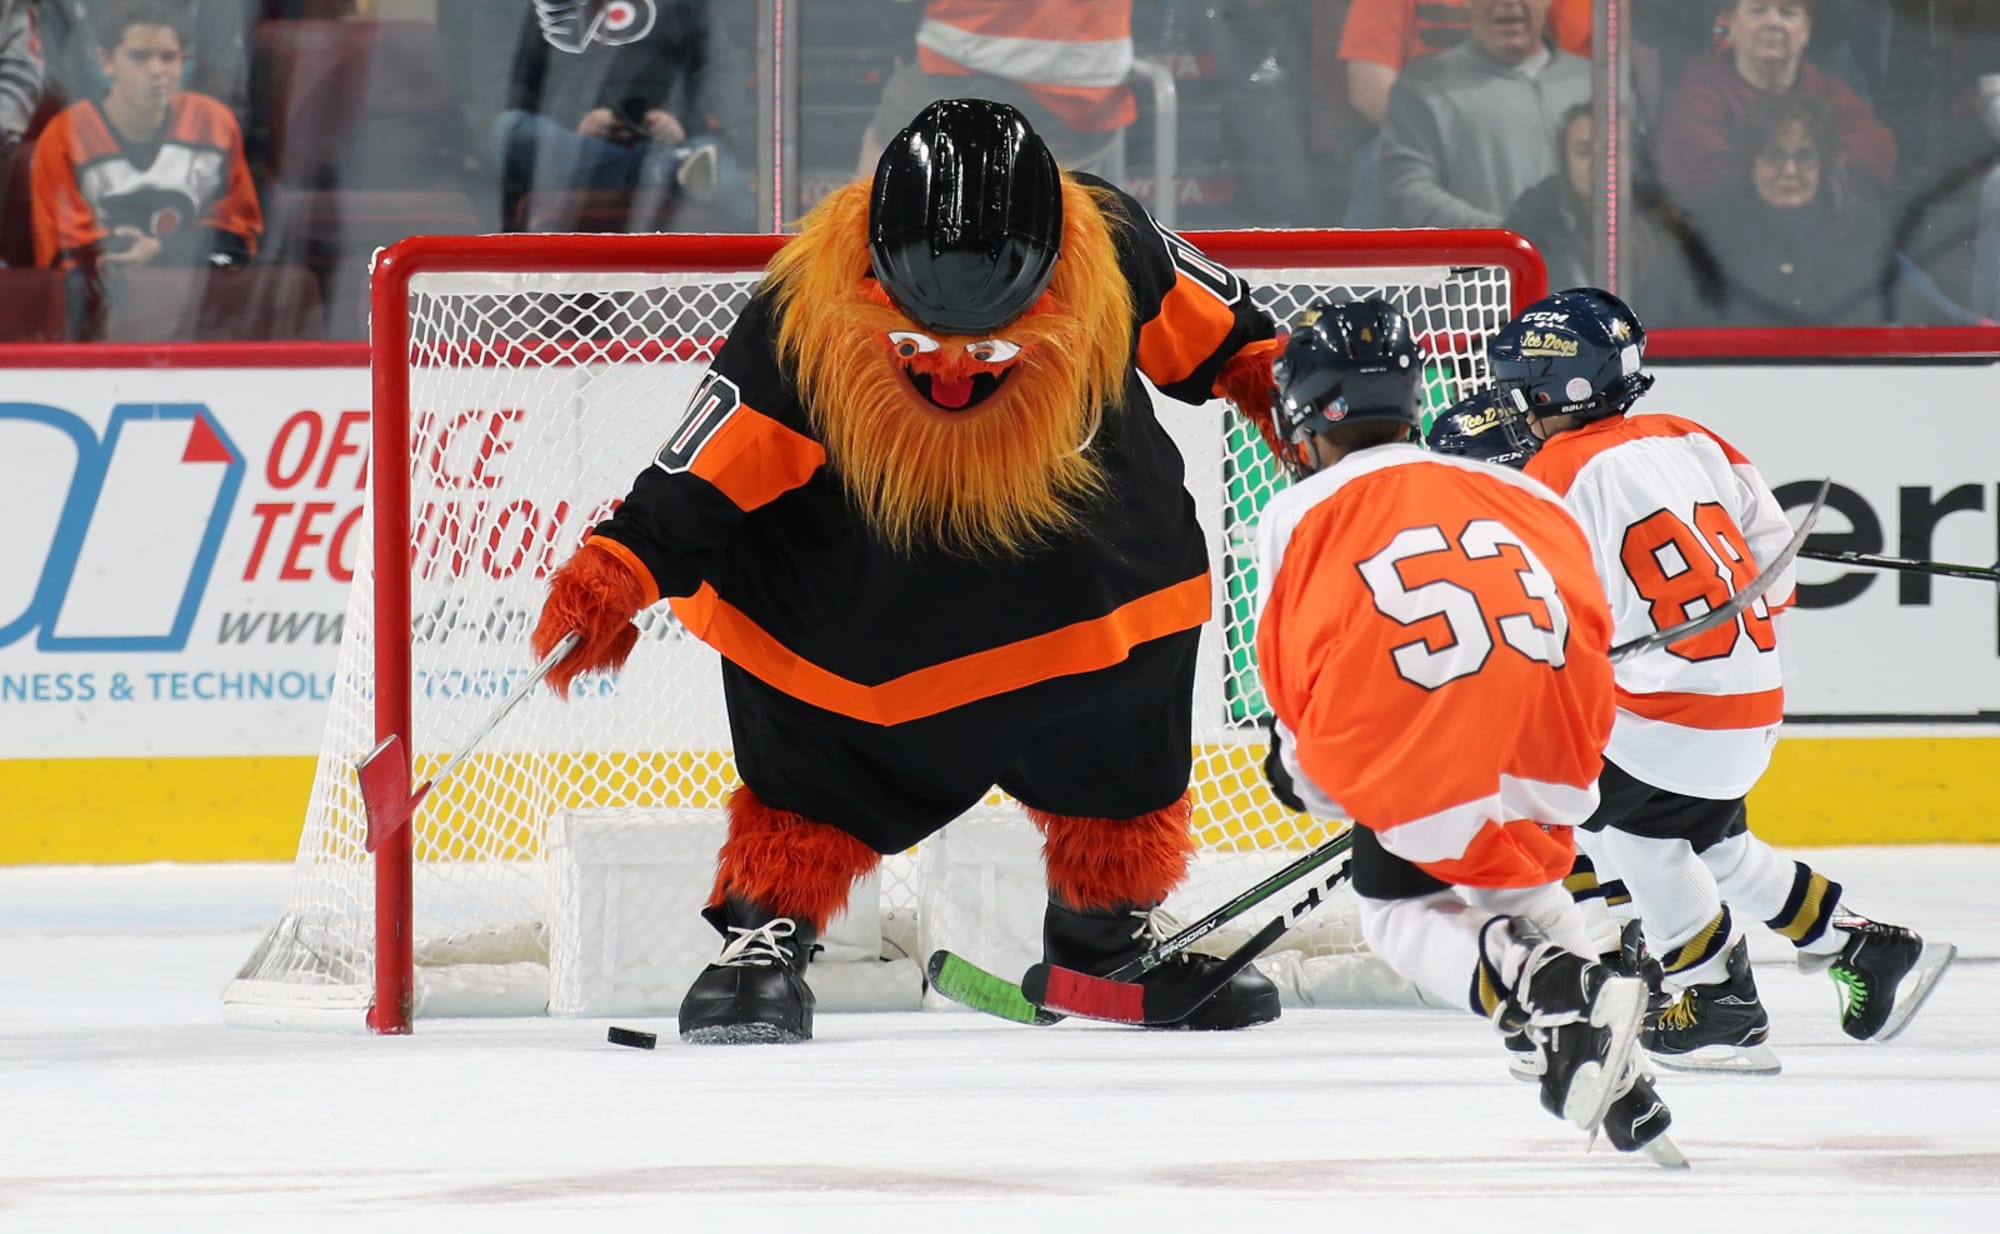 Philadelphia Flyers unveil Gritty, 'the most terrifying mascot in